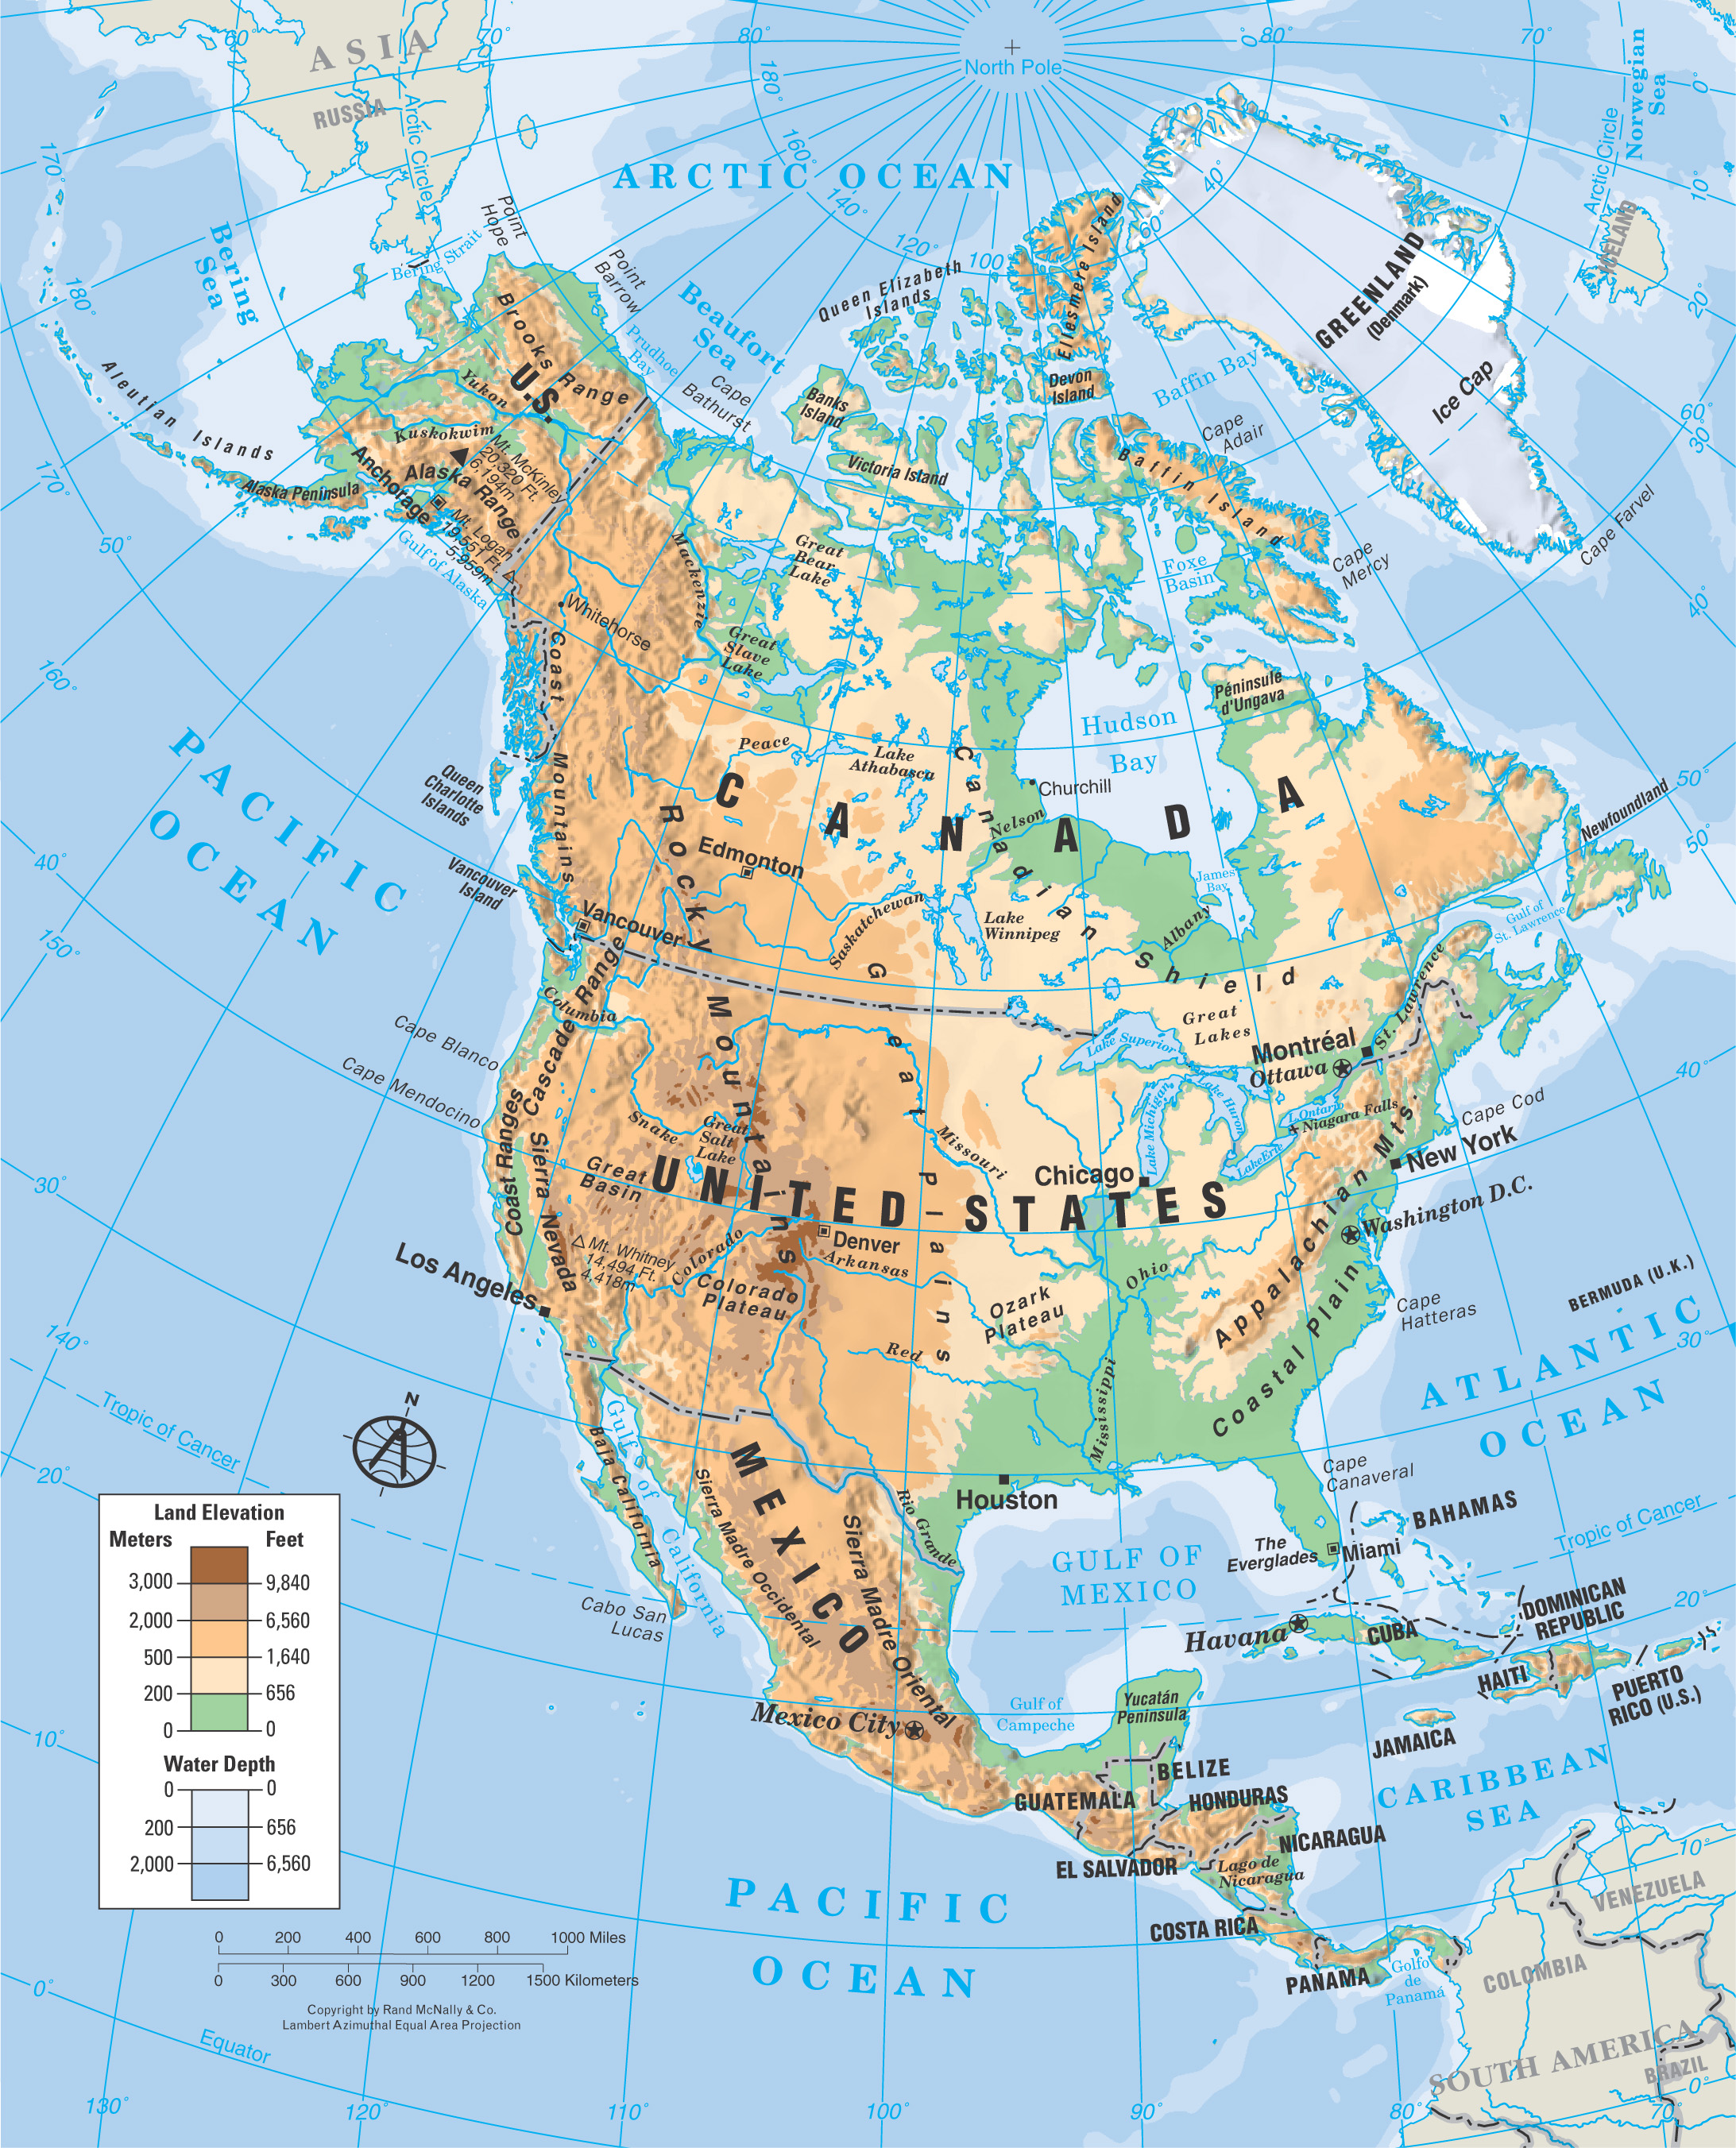 physical map of the North America: mountains, plains, rivers, etc are shaded with different colors